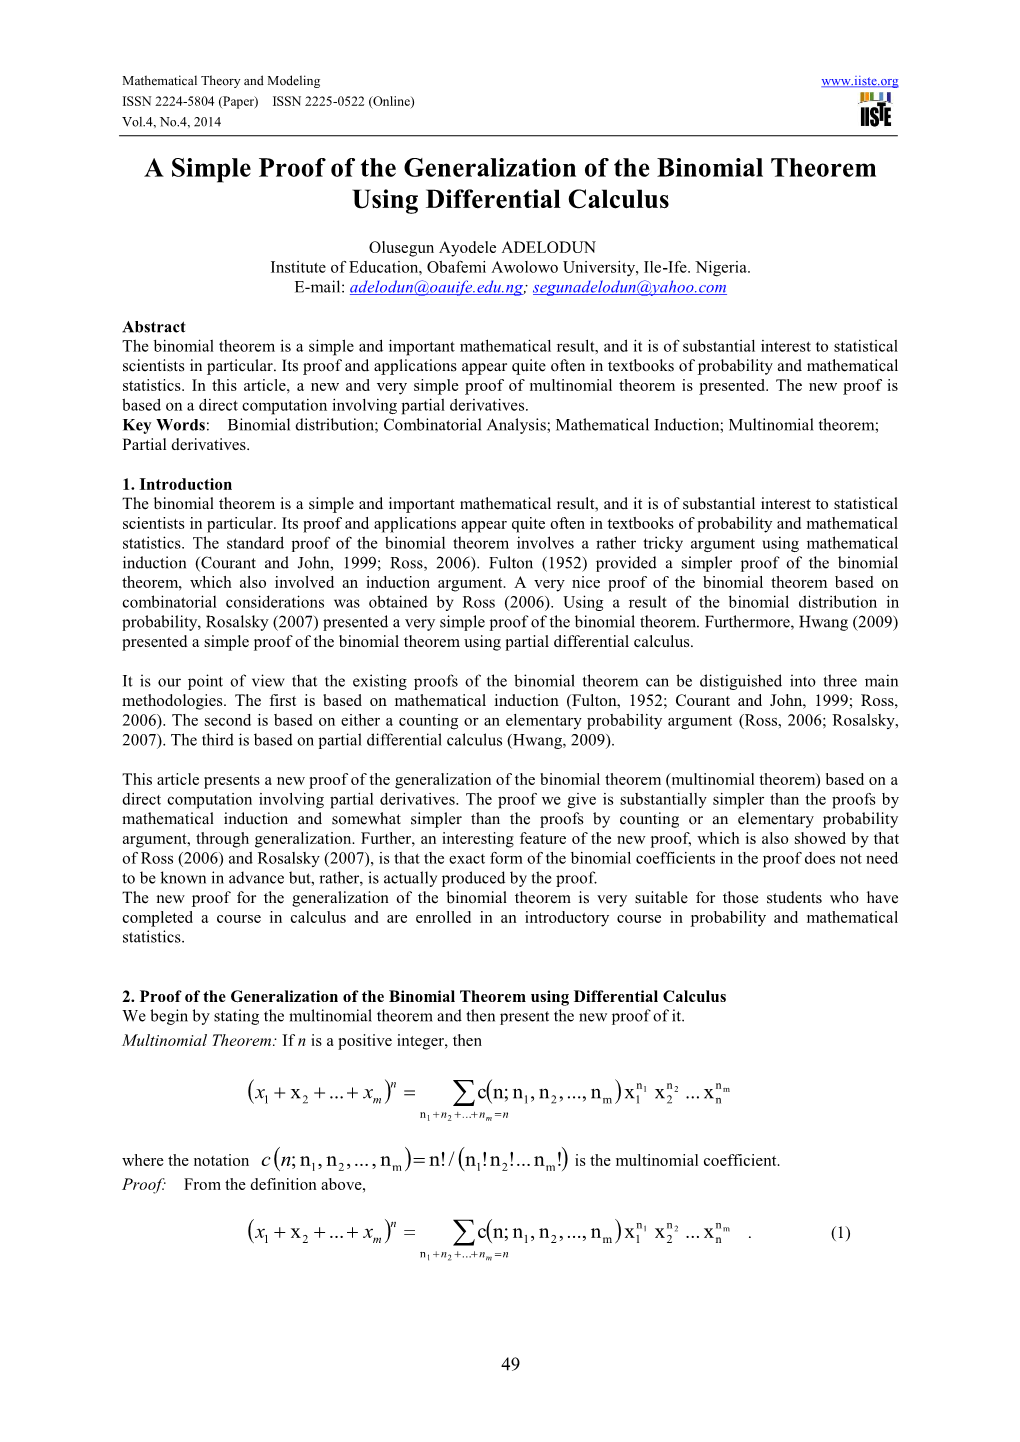 A Simple Proof of the Generalization of the Binomial Theorem Using Differential Calculus